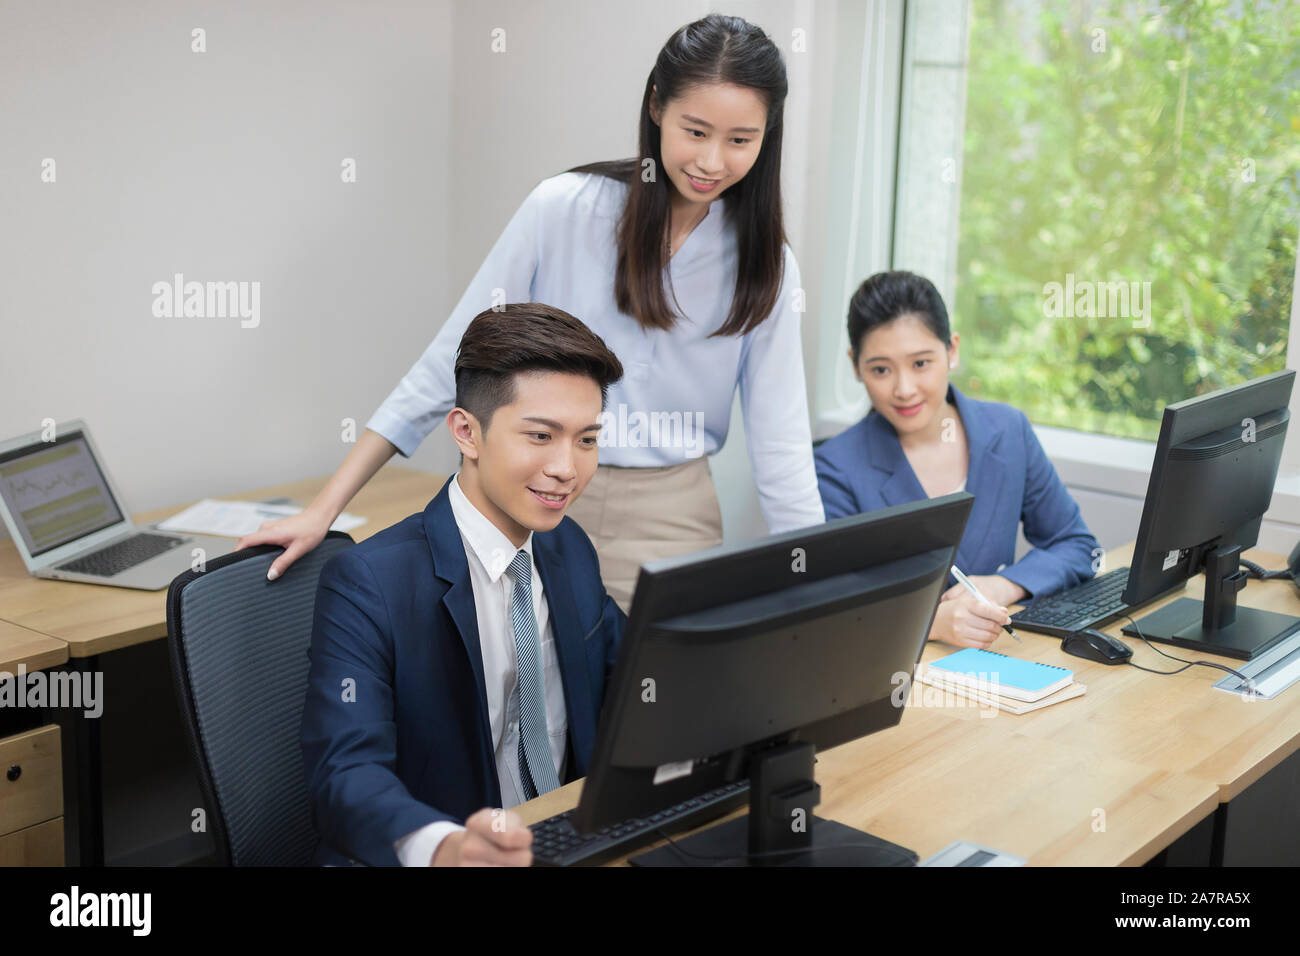 Three smiling young male and female businesspeople looking at a computer monitor of one of them while working at a desk in an office Stock Photo